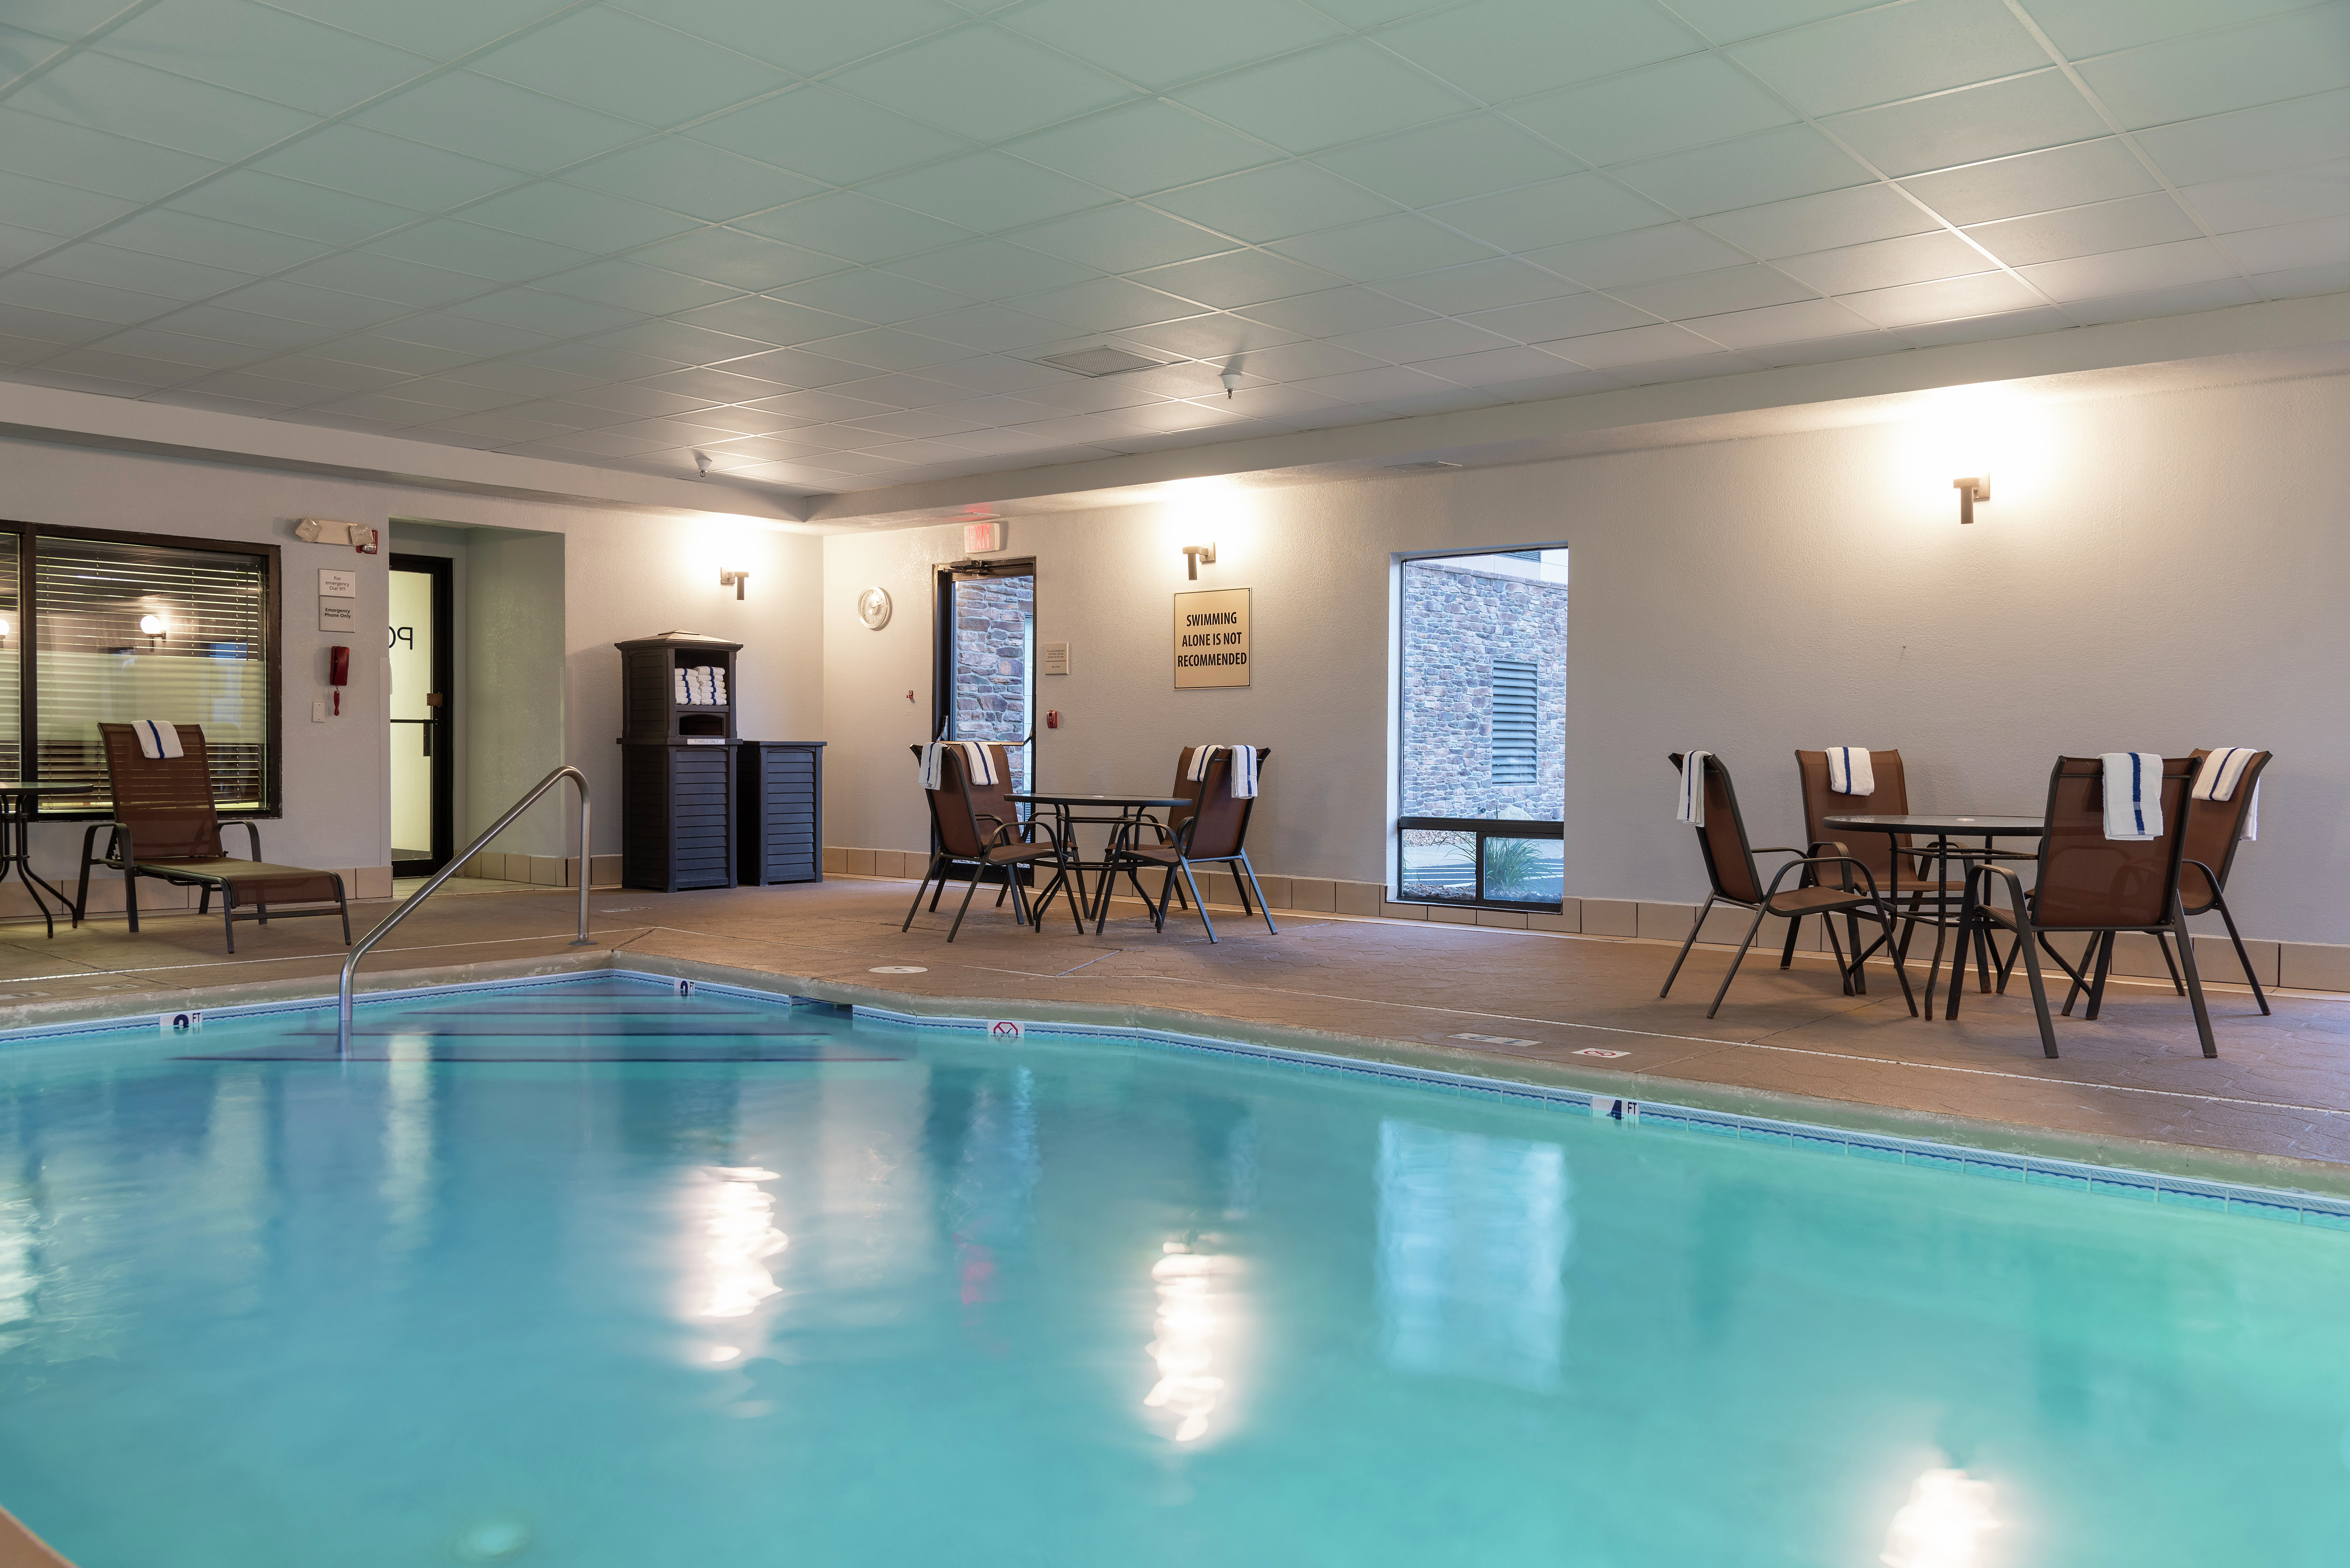 Indoor Pool With Chairs